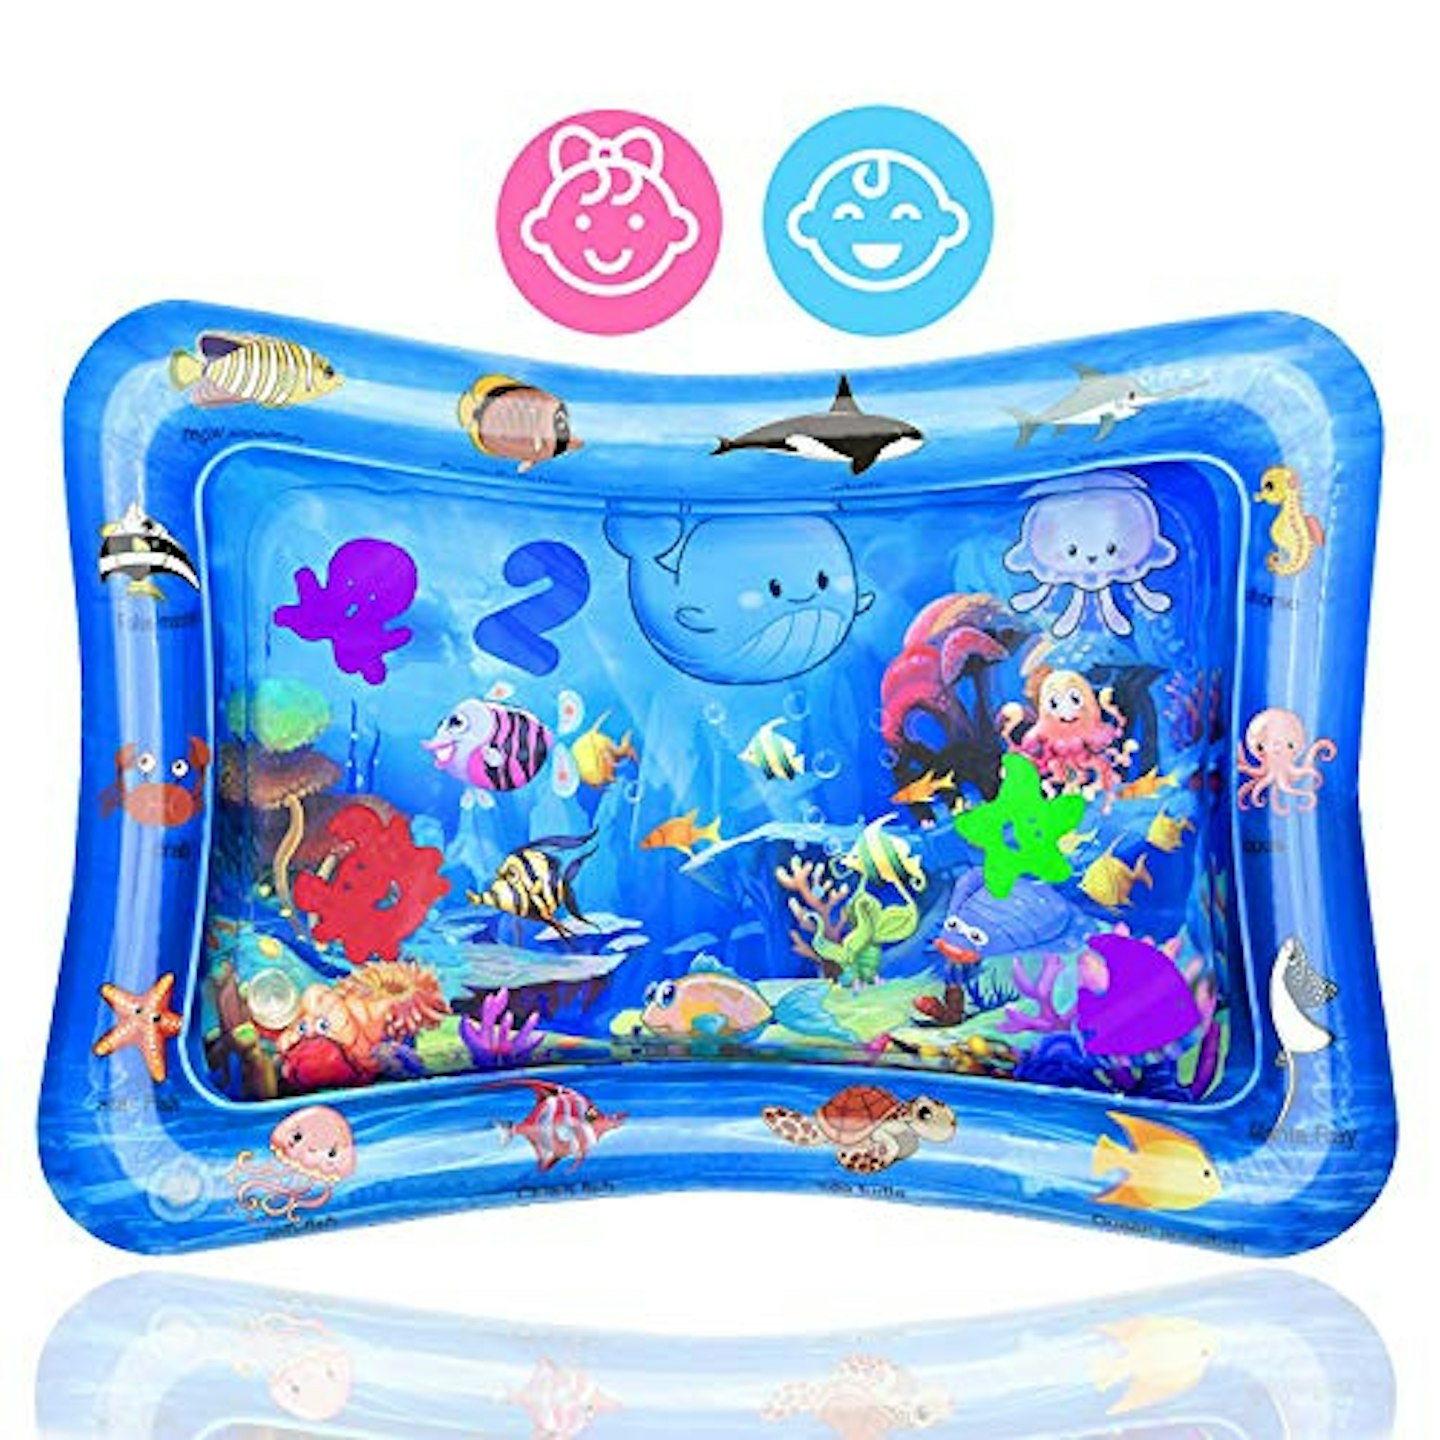 Tummy time toys -Inflatable water play mat